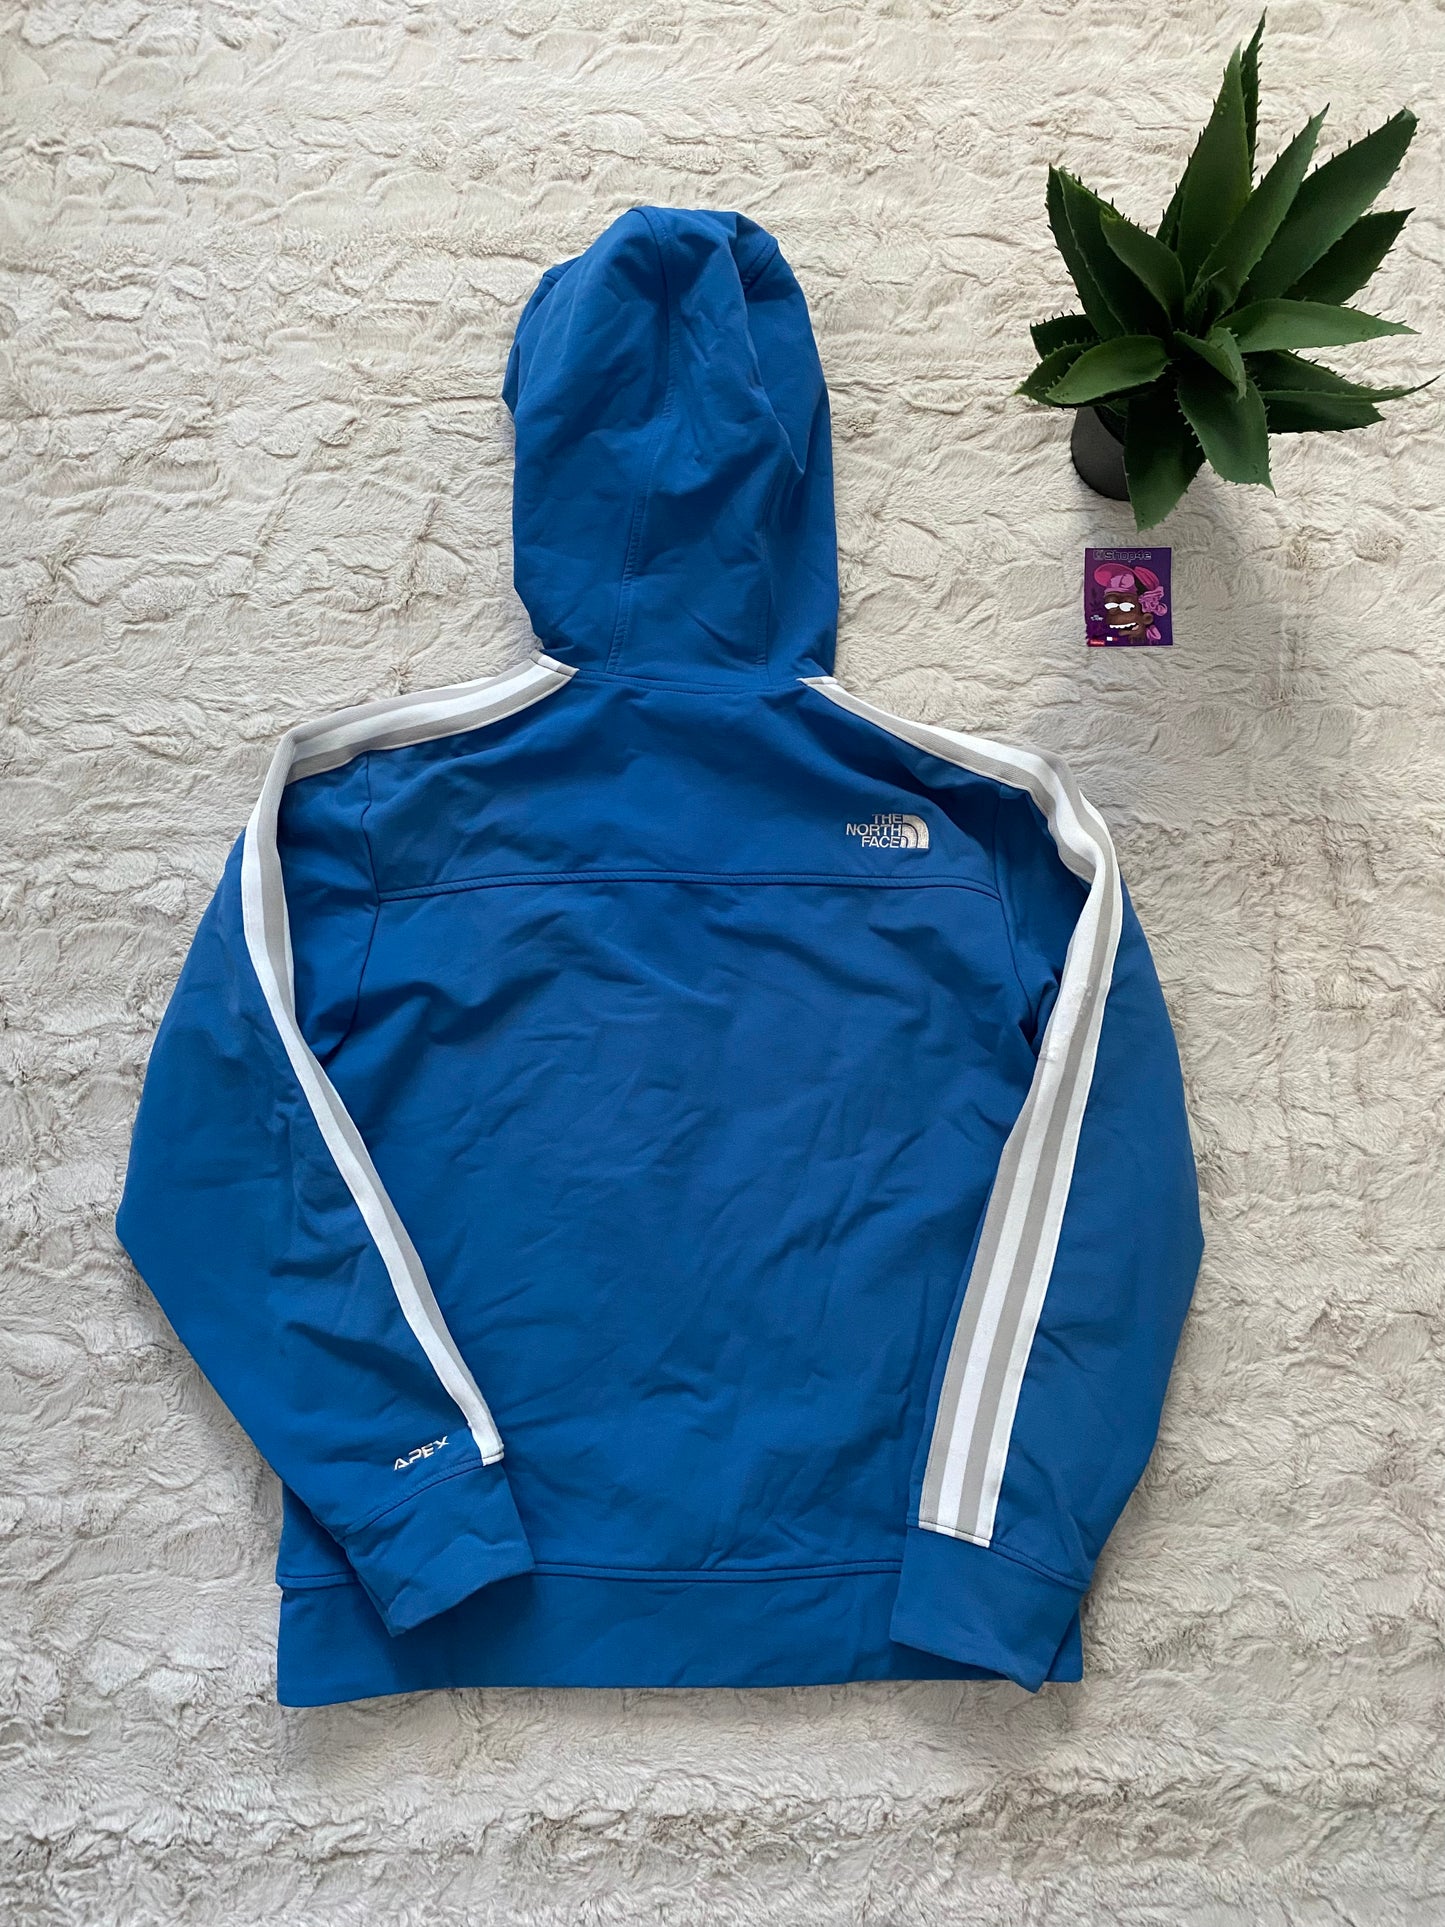 The North Face Zip-Up